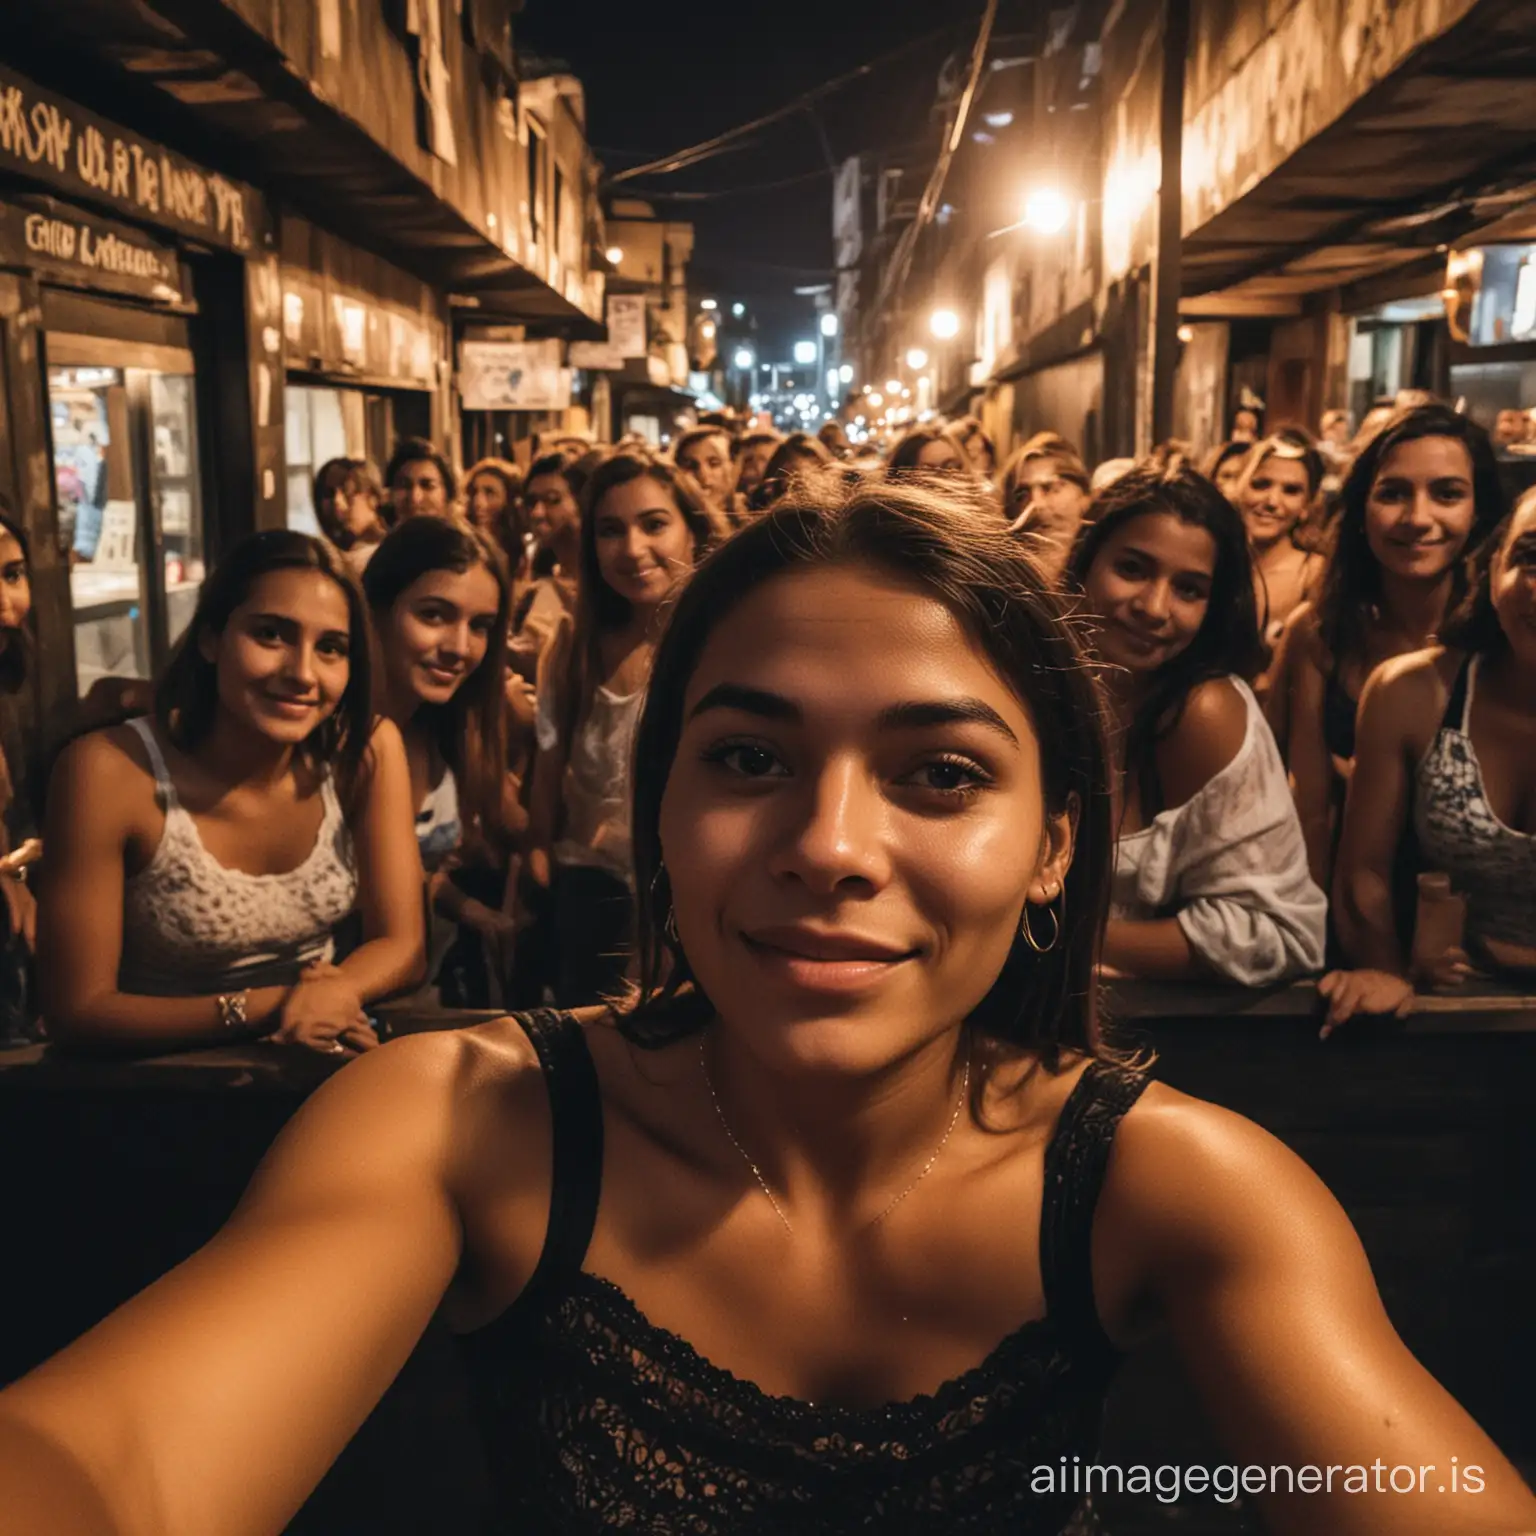 a woman living in a favela in RIO takes a selfie in a dark bar in the favela surrounded by other young women from the favela